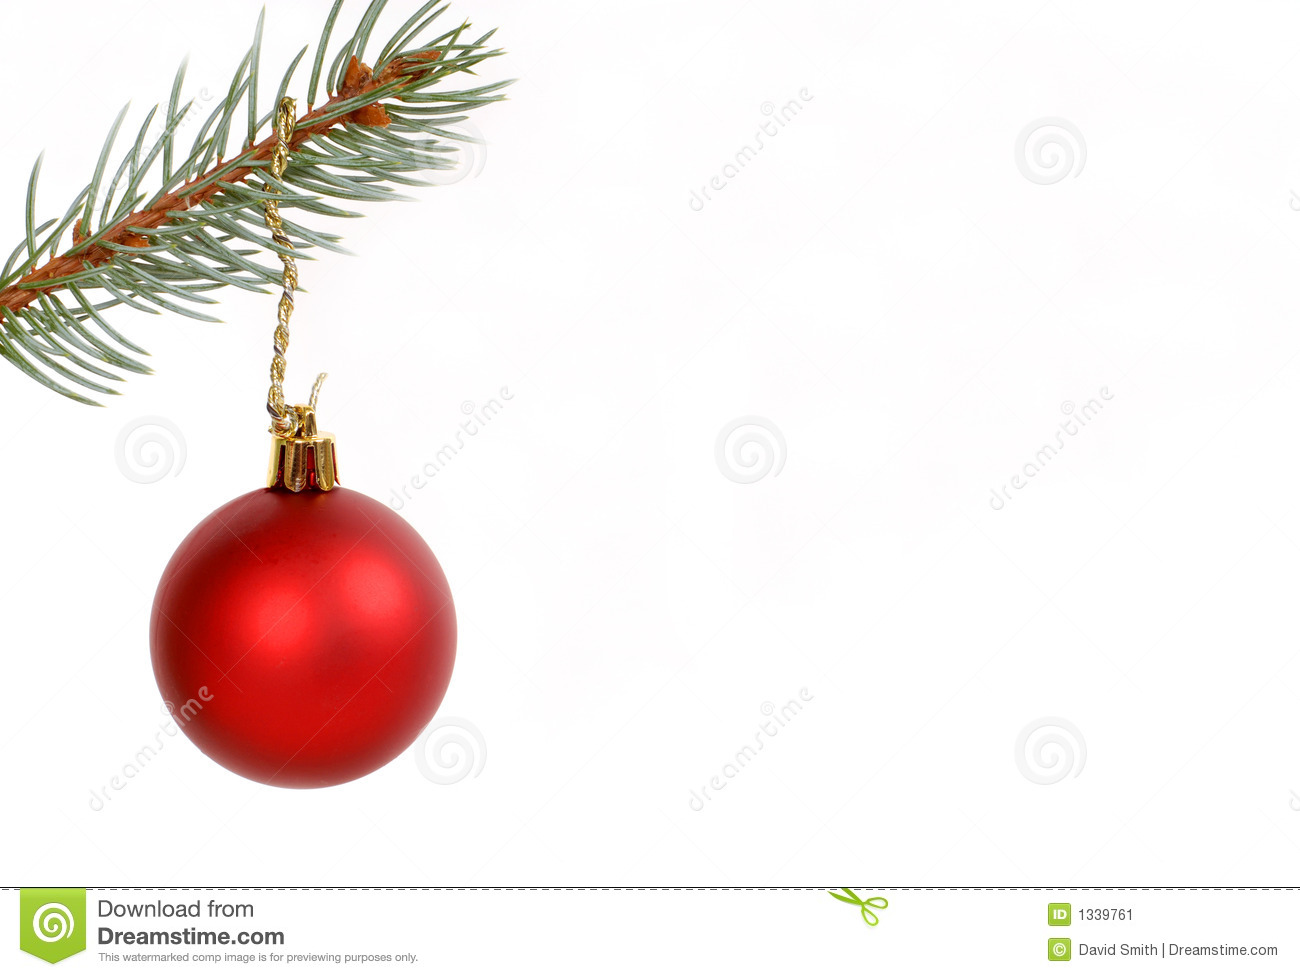 Round Red Christmas Ornament Hanging From Evergreen Branch Stock Image